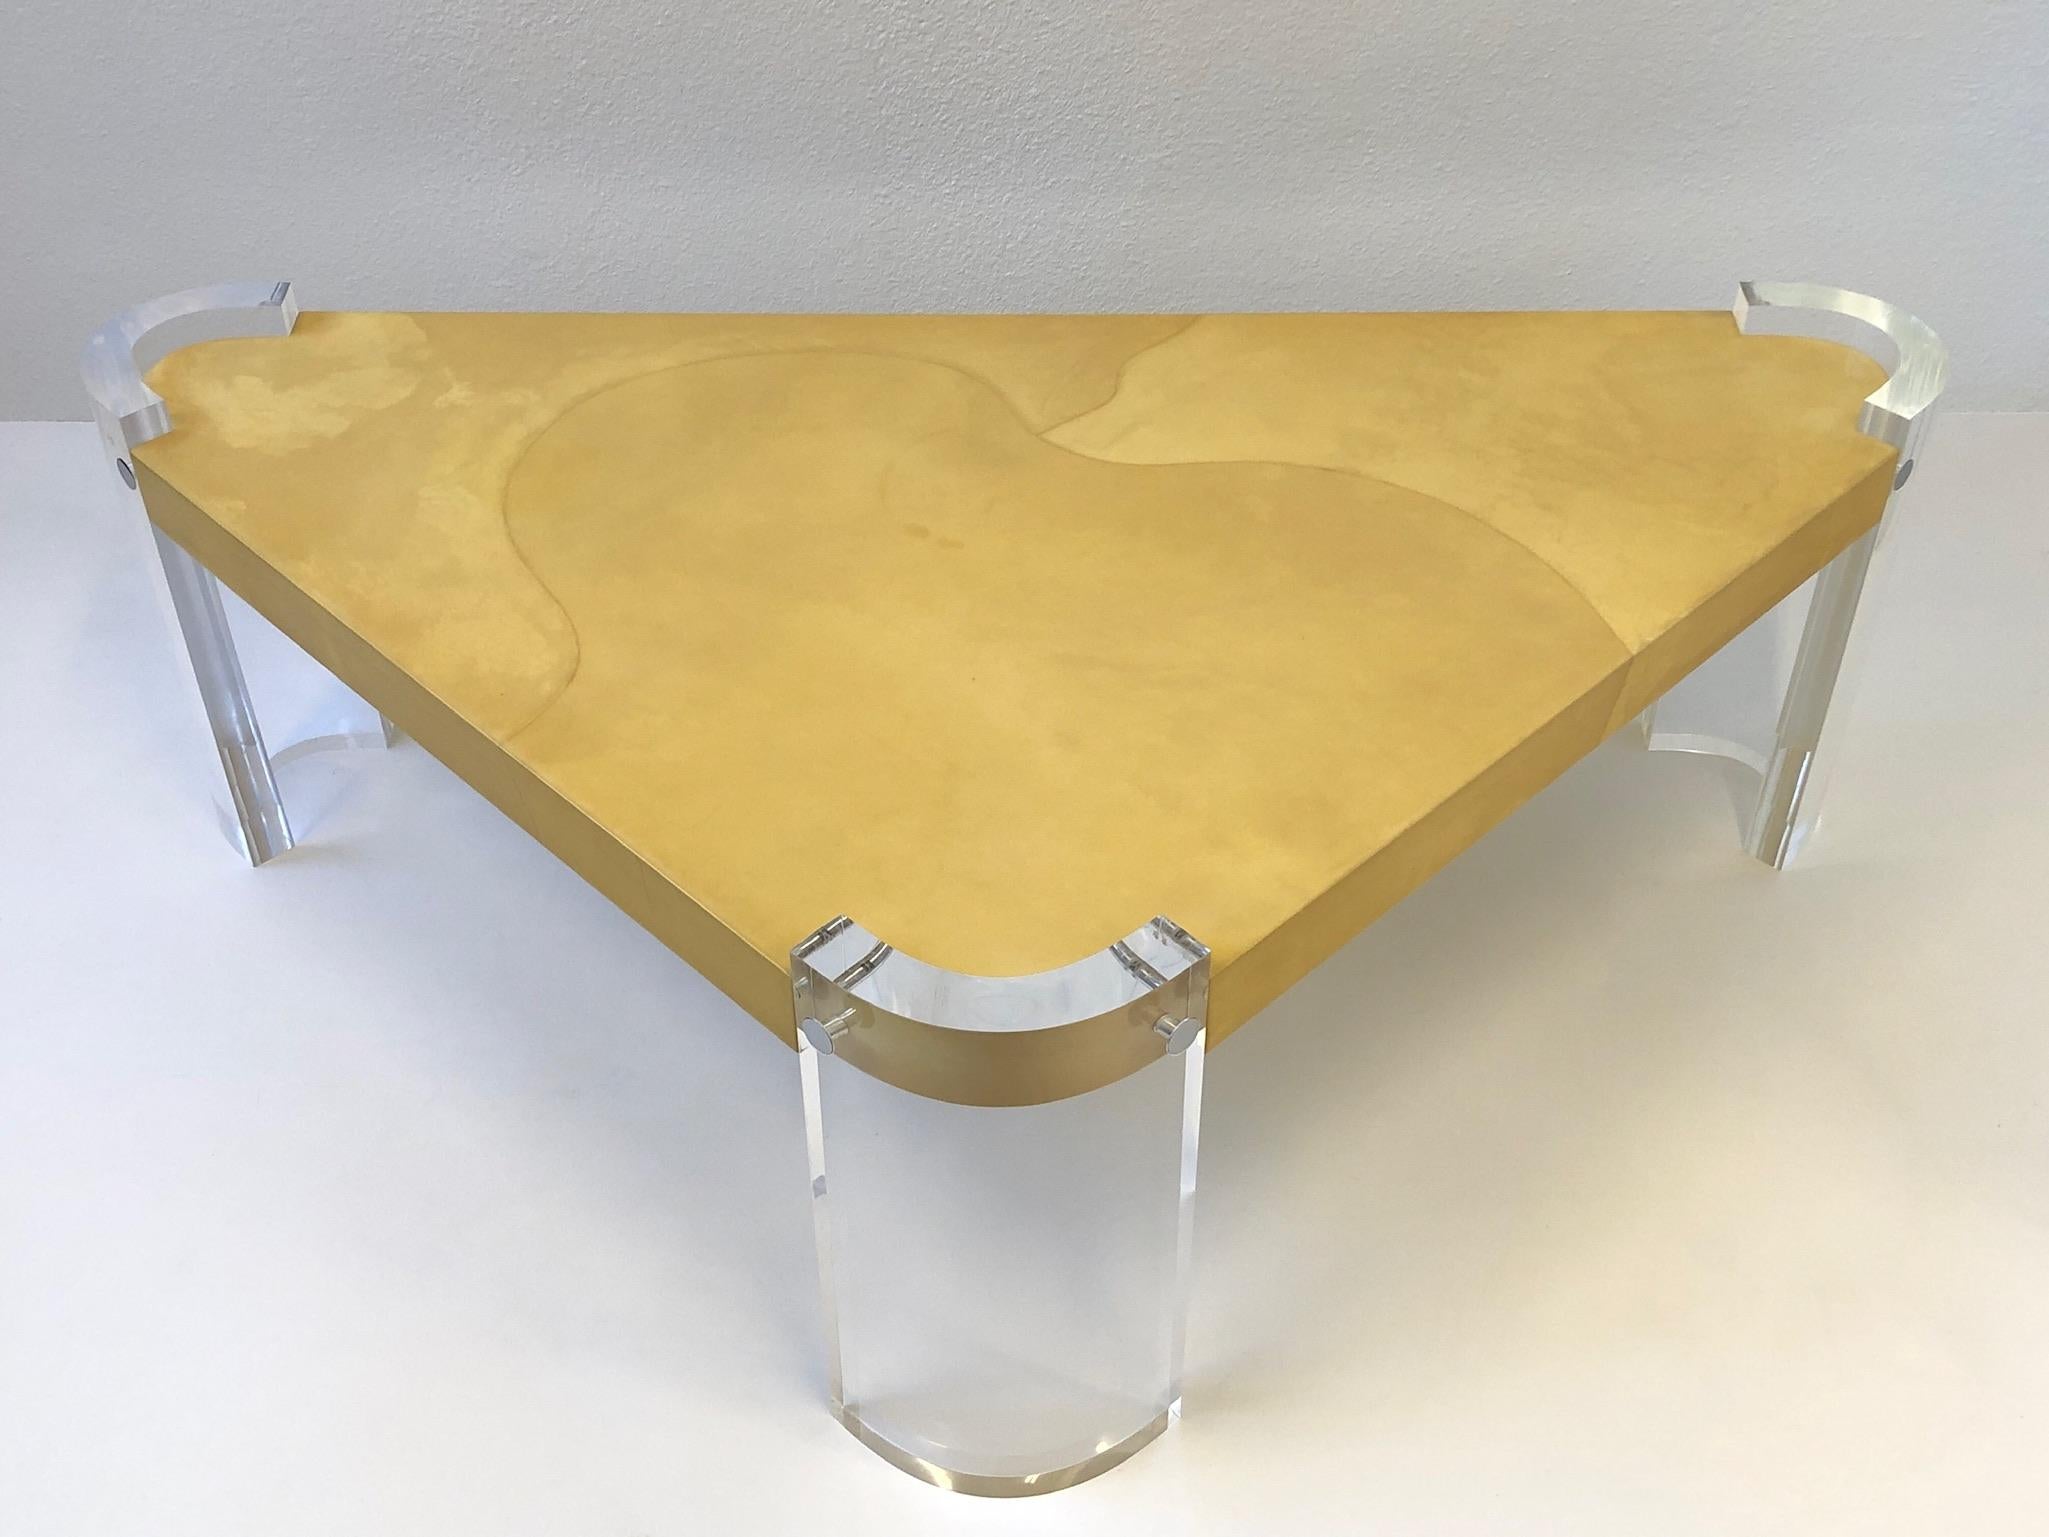 Lacquered Lucite and Goatskin Parchment Triangular Shaped Coffee Table